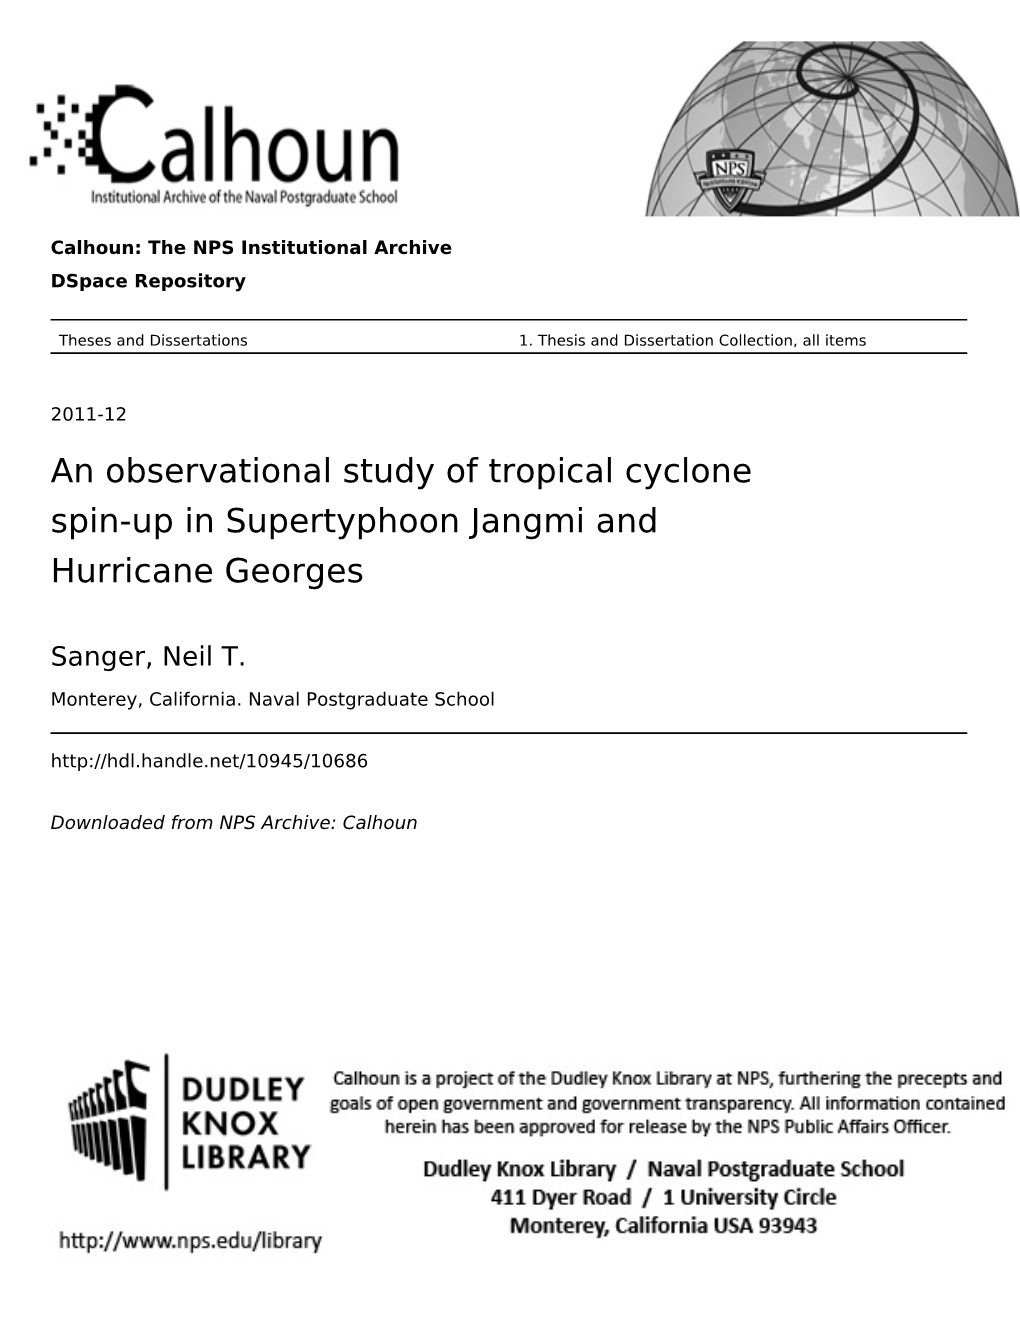 An Observational Study of Tropical Cyclone Spin-Up in Supertyphoon Jangmi and Hurricane Georges